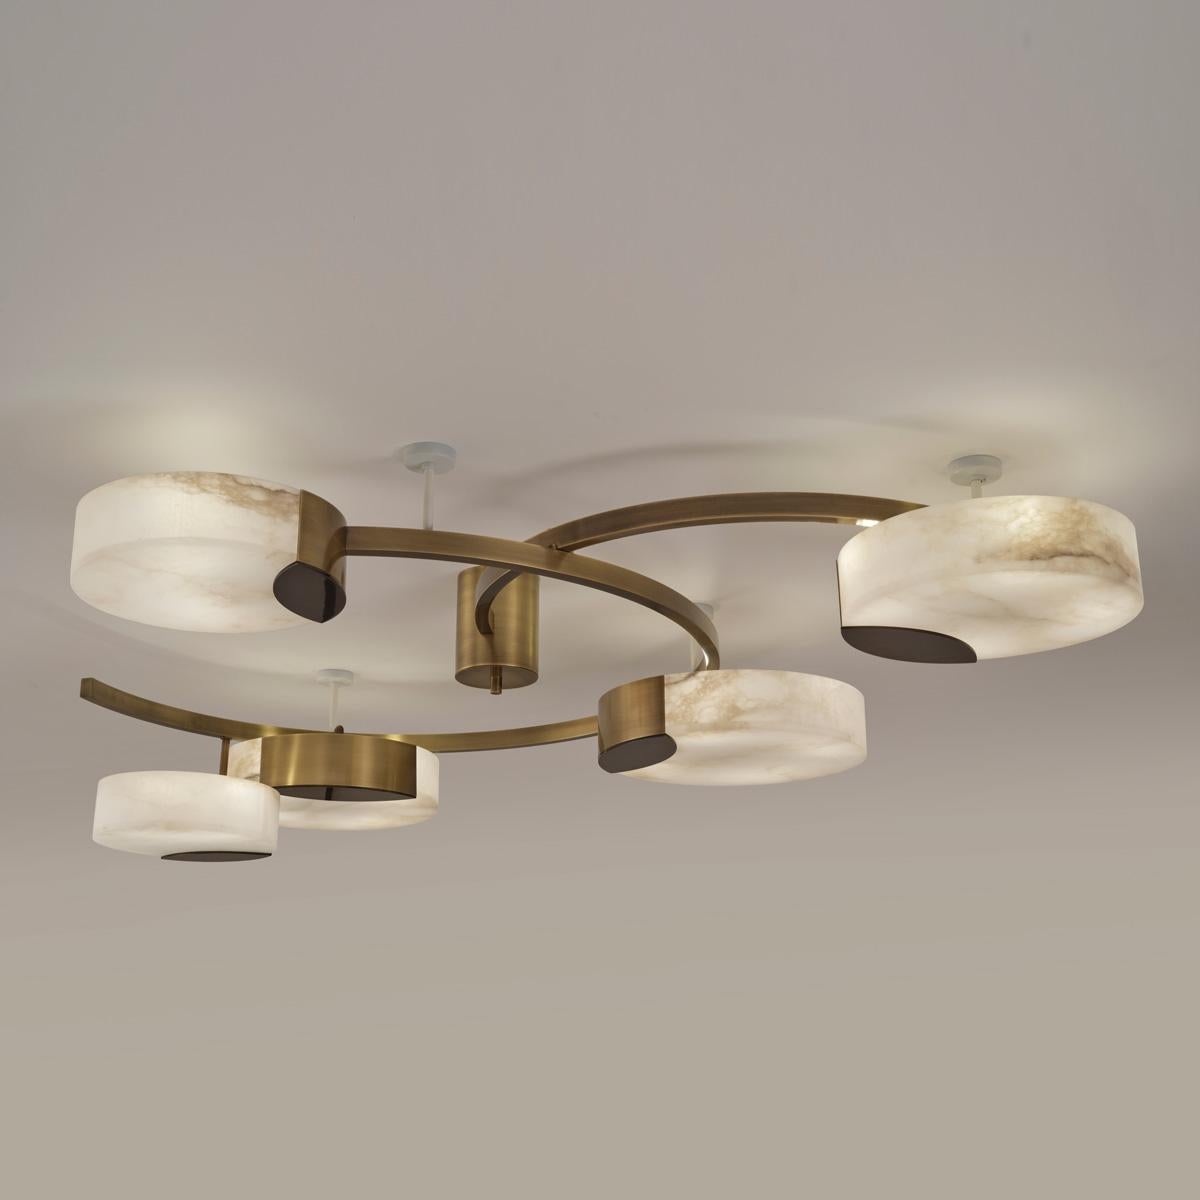 Cloud N.5 Ceiling Light by Gaspare Asaro-Satin Brass Finish For Sale 4